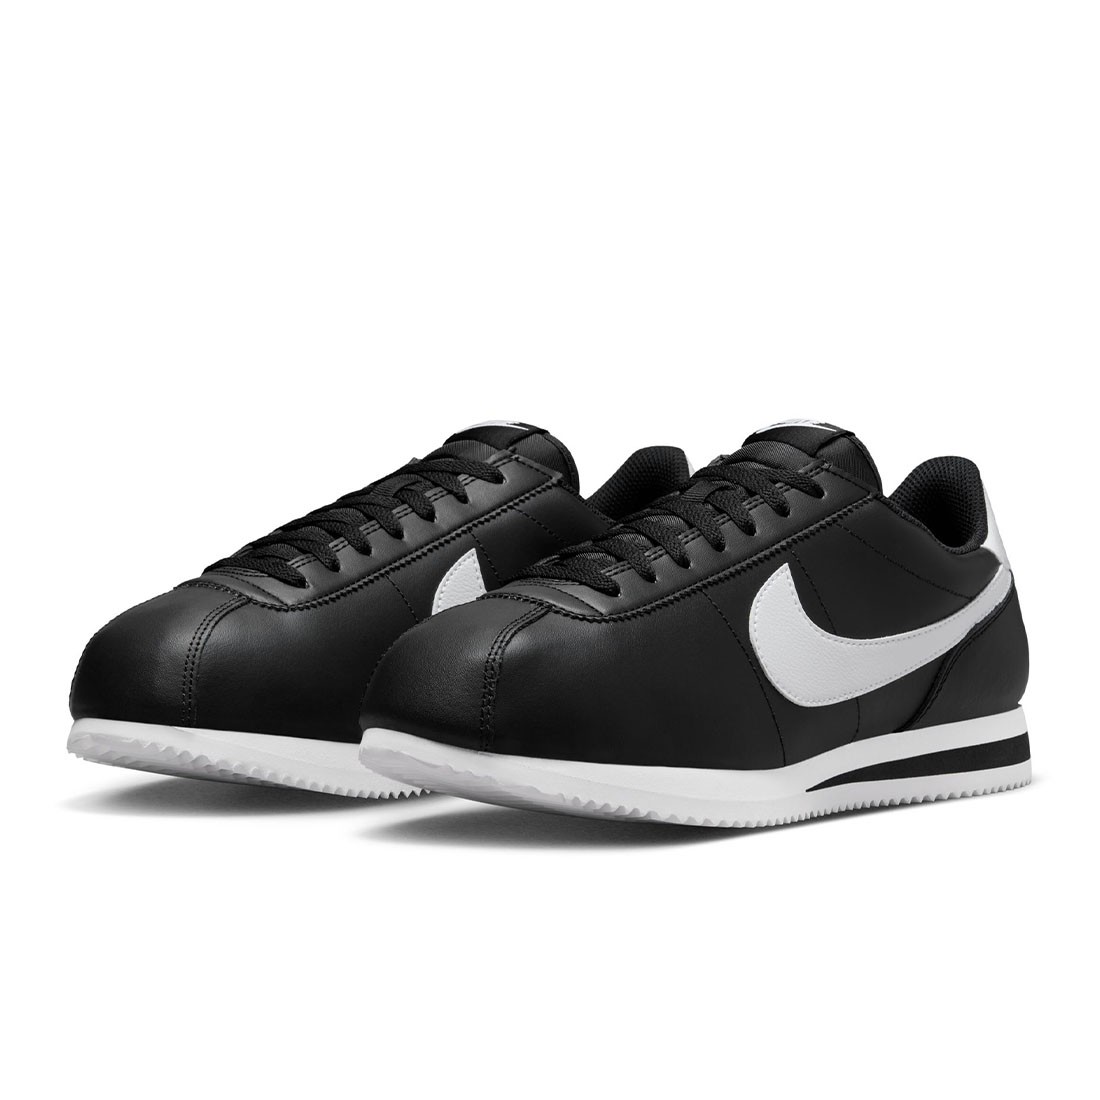 nike low nike by you blue no vat air denim air force